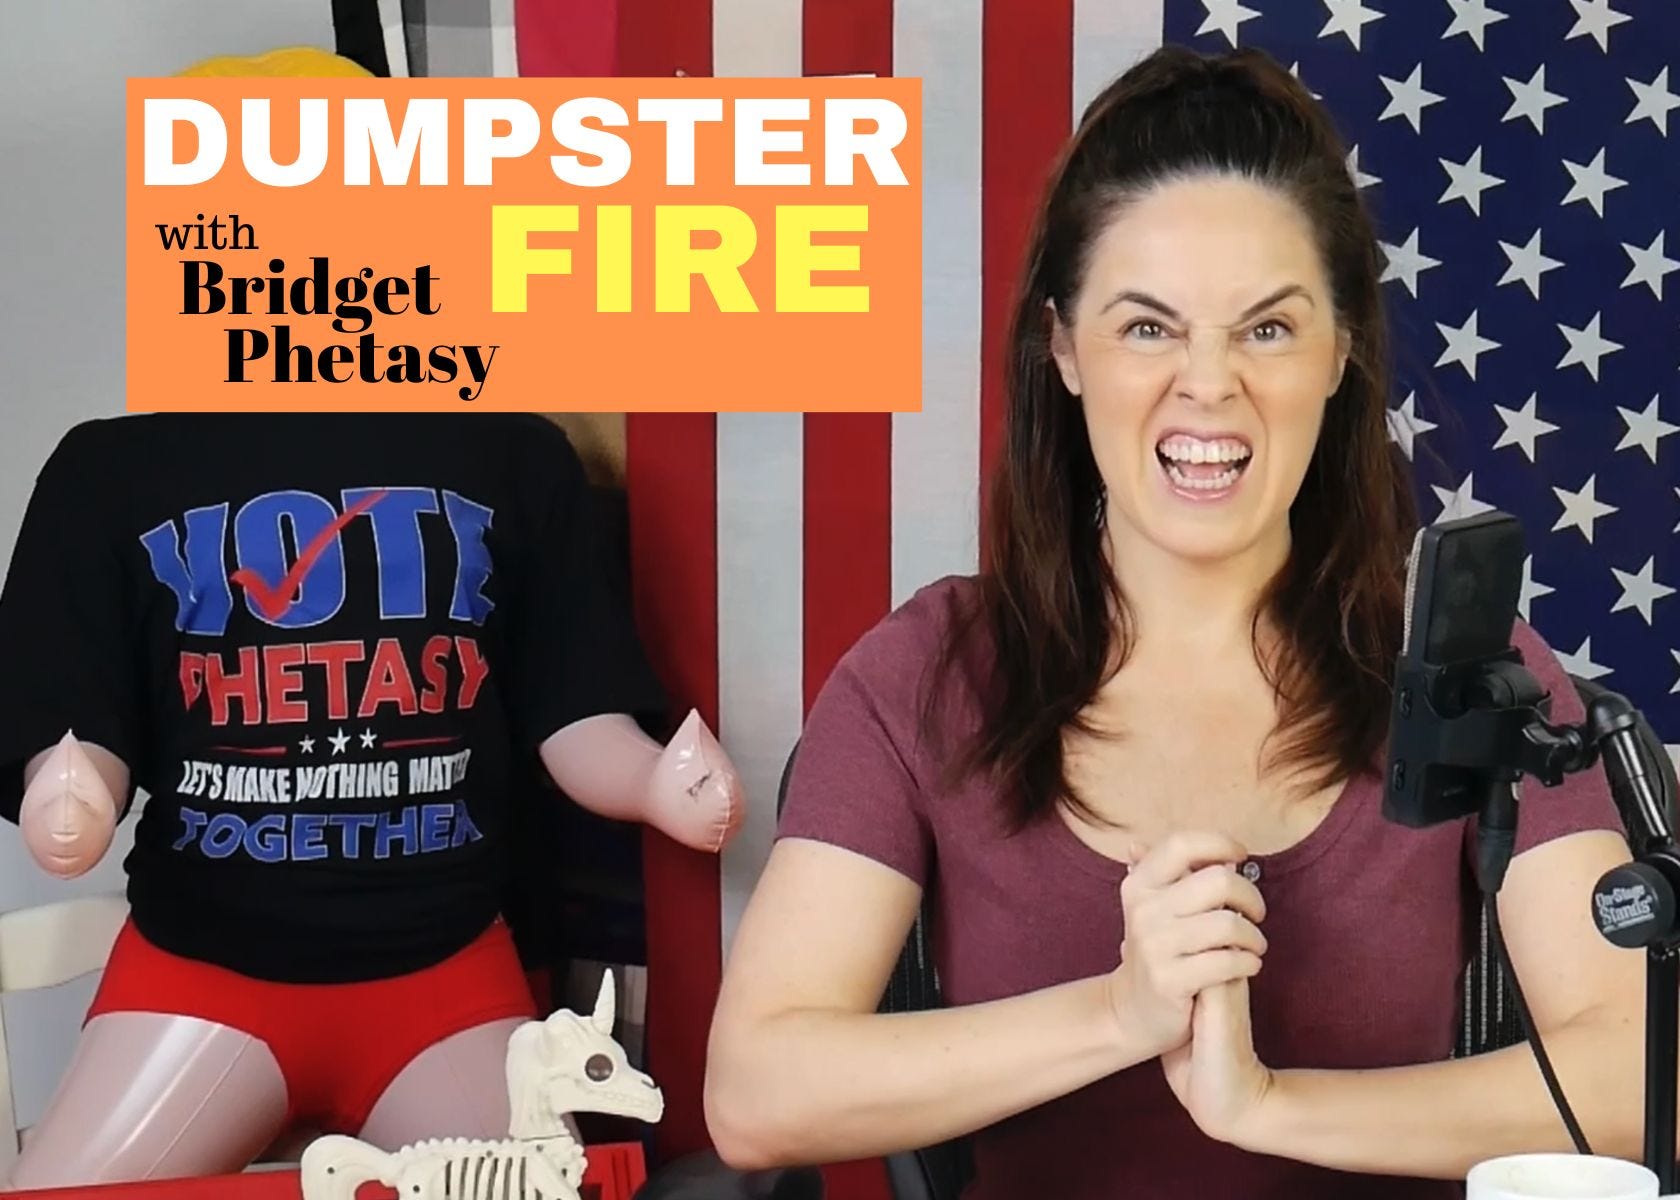 The Diaper People - Dumpster Fire 134